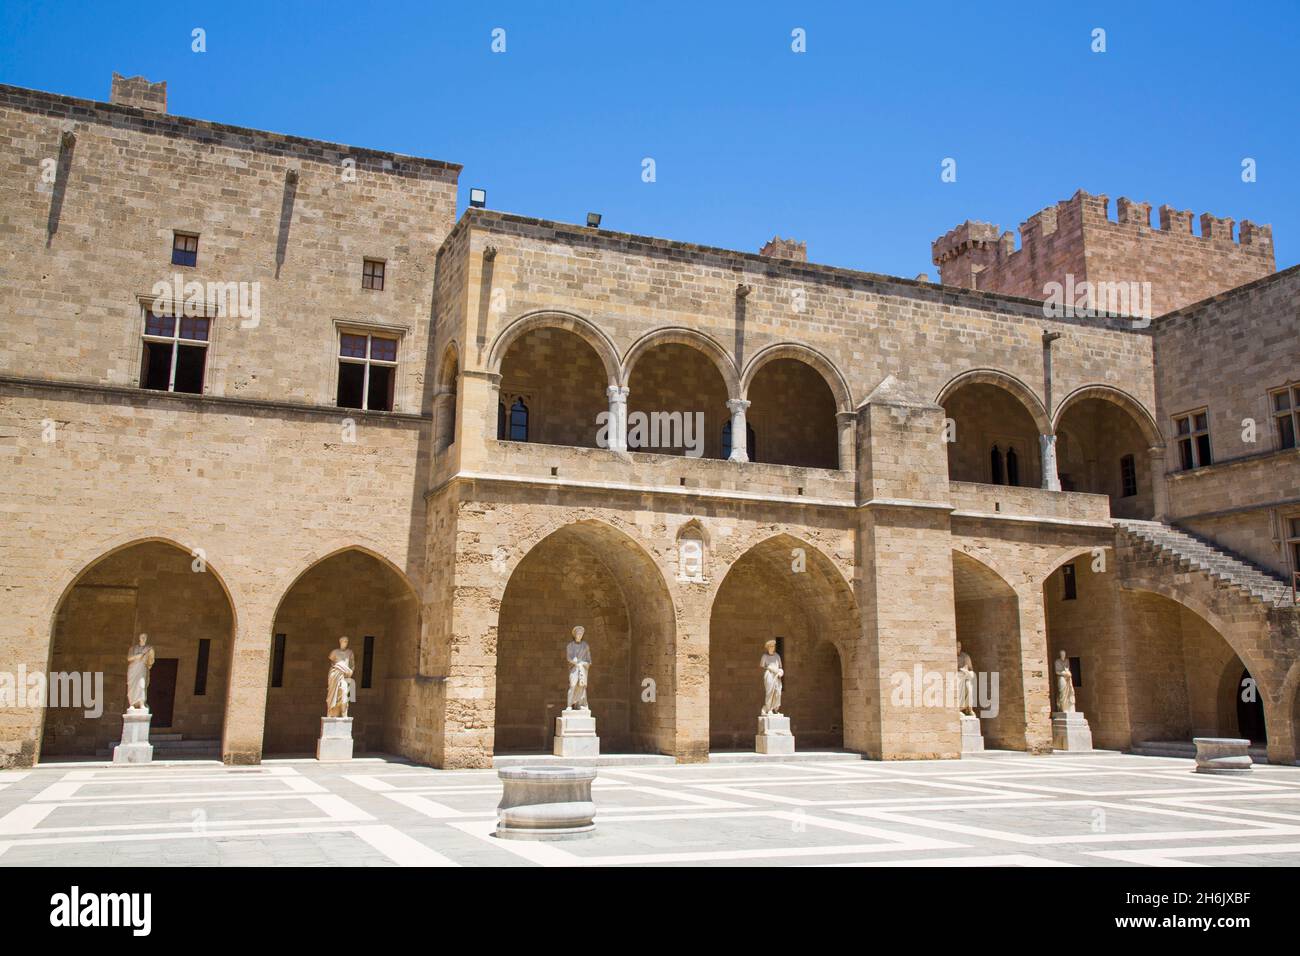 Courtyard, Archaeological Museum, Rhodes Old Town, UNESCO World Heritage Site, Rhodes, Dodecanese Island Group, Greek Islands, Greece, Europe Stock Photo